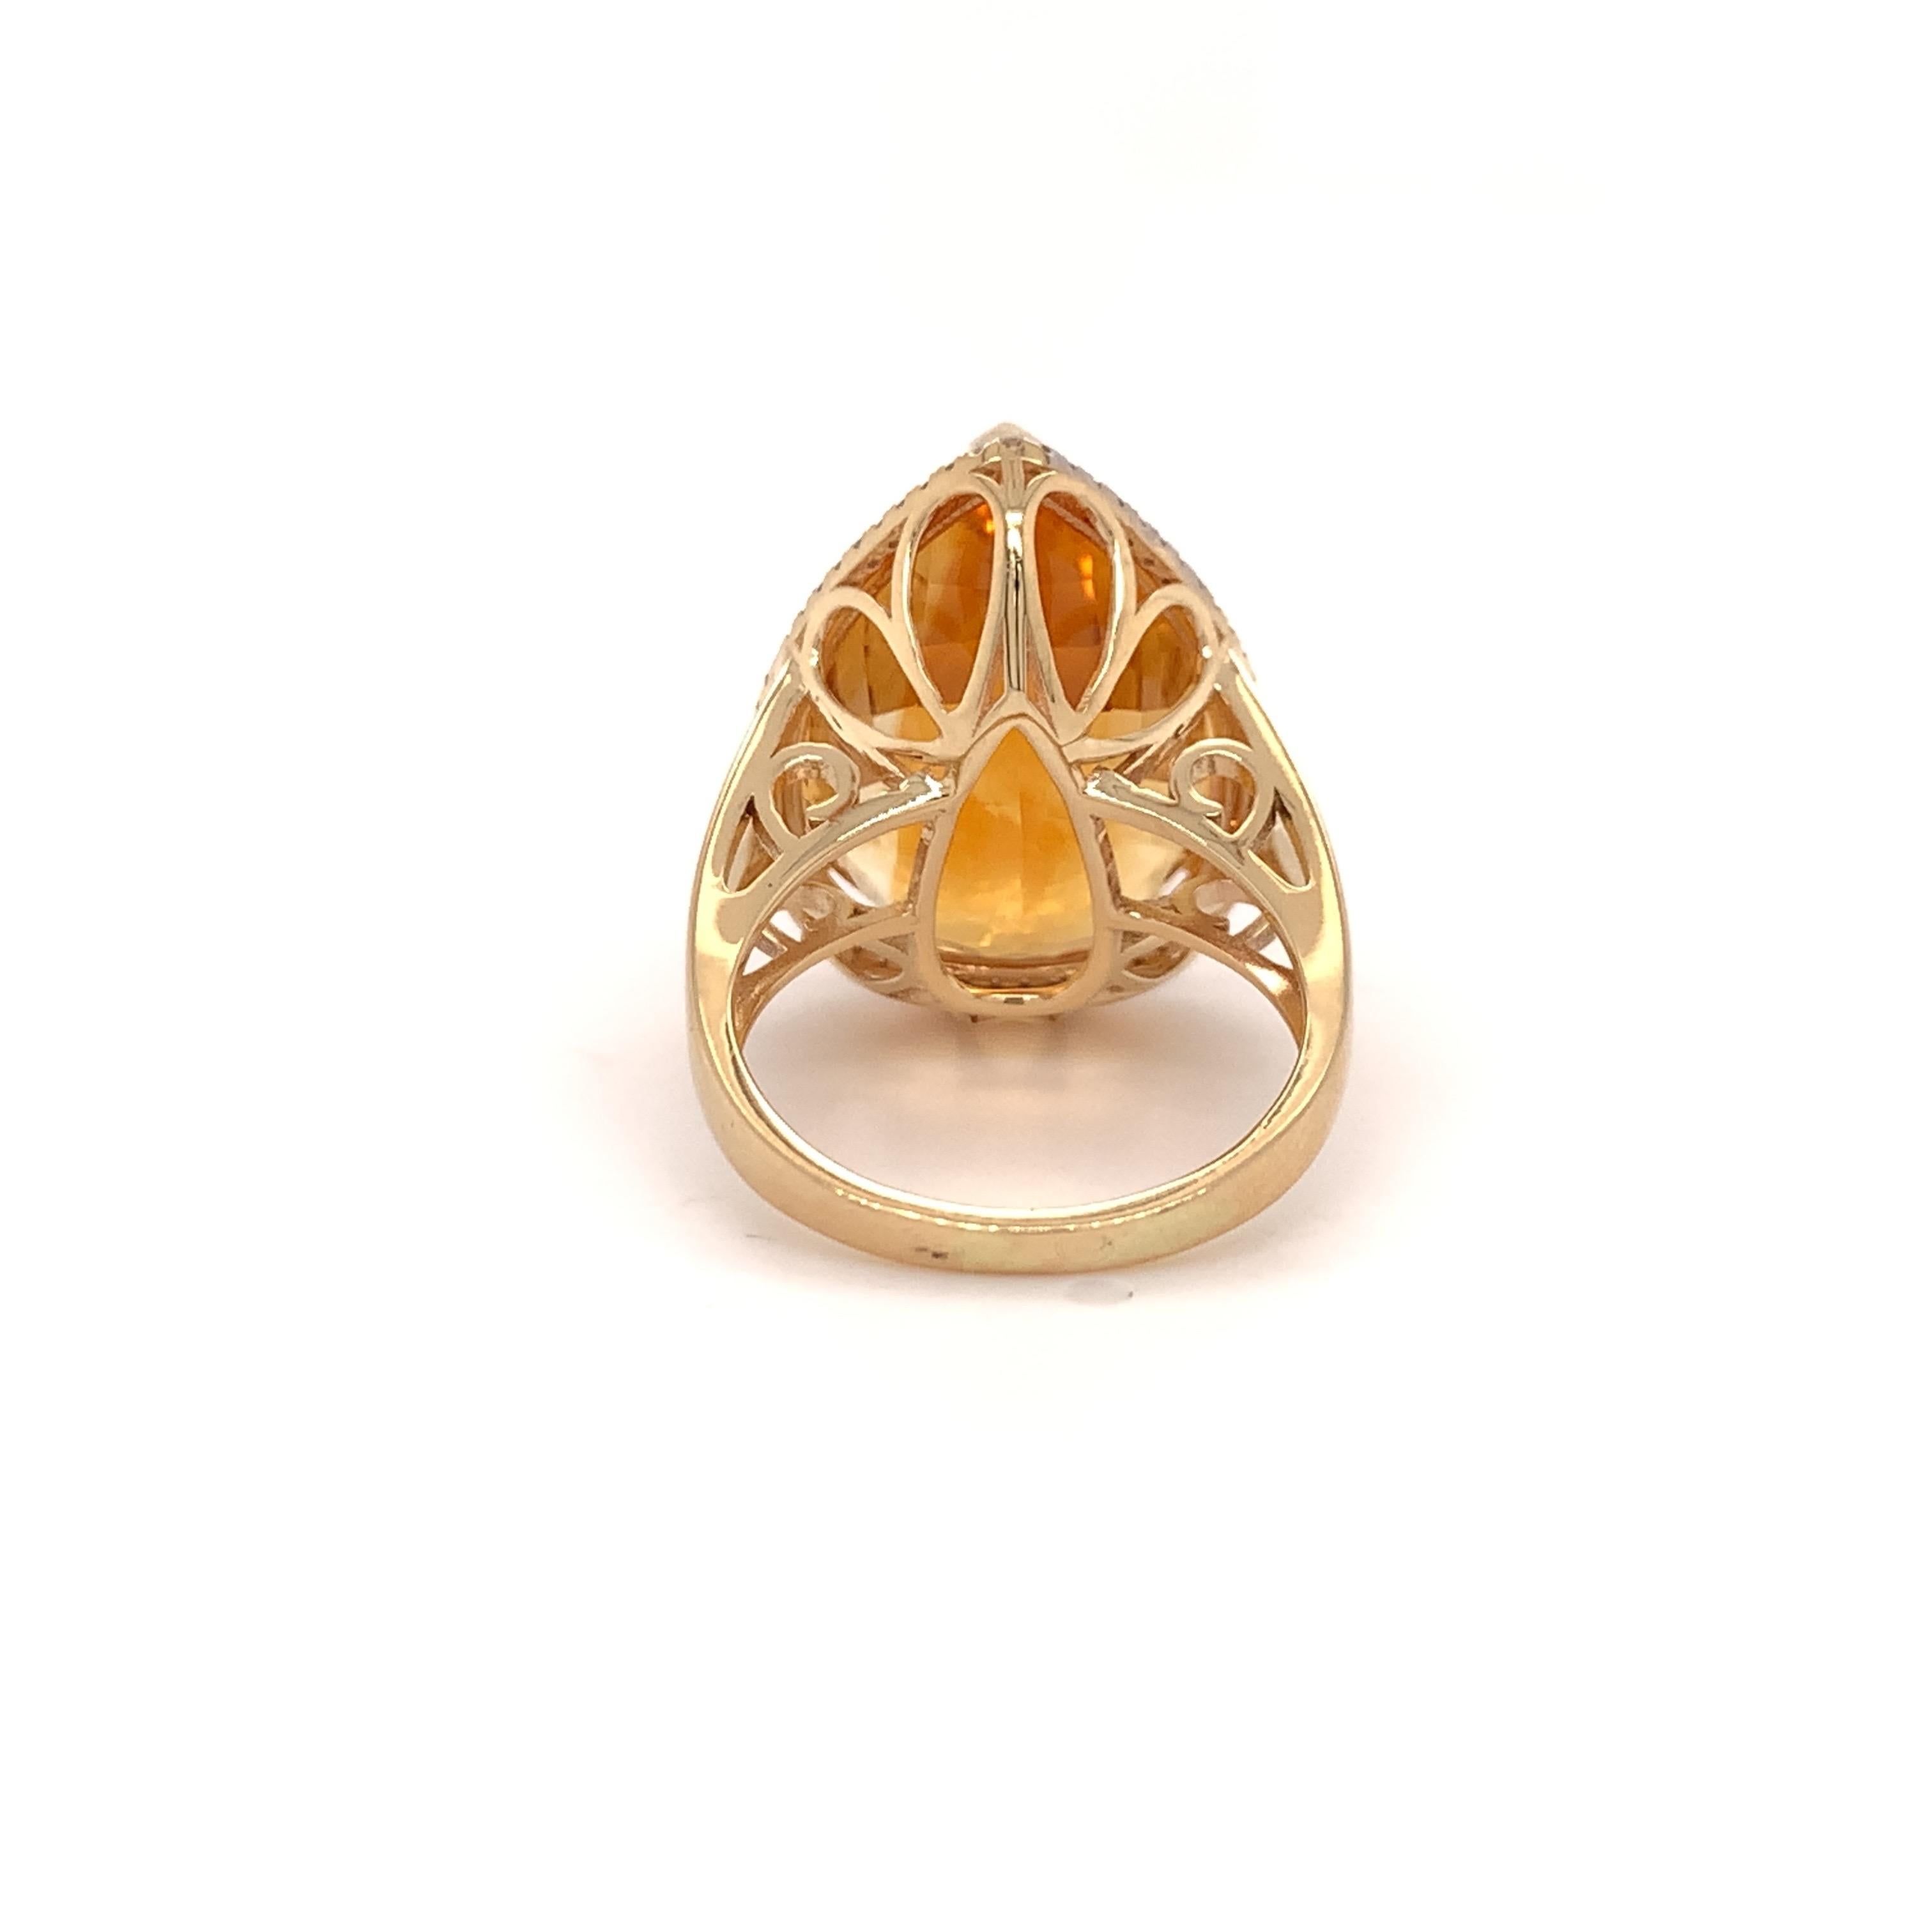 Contemporary 16.54 Carat Citrine Cocktail Ring